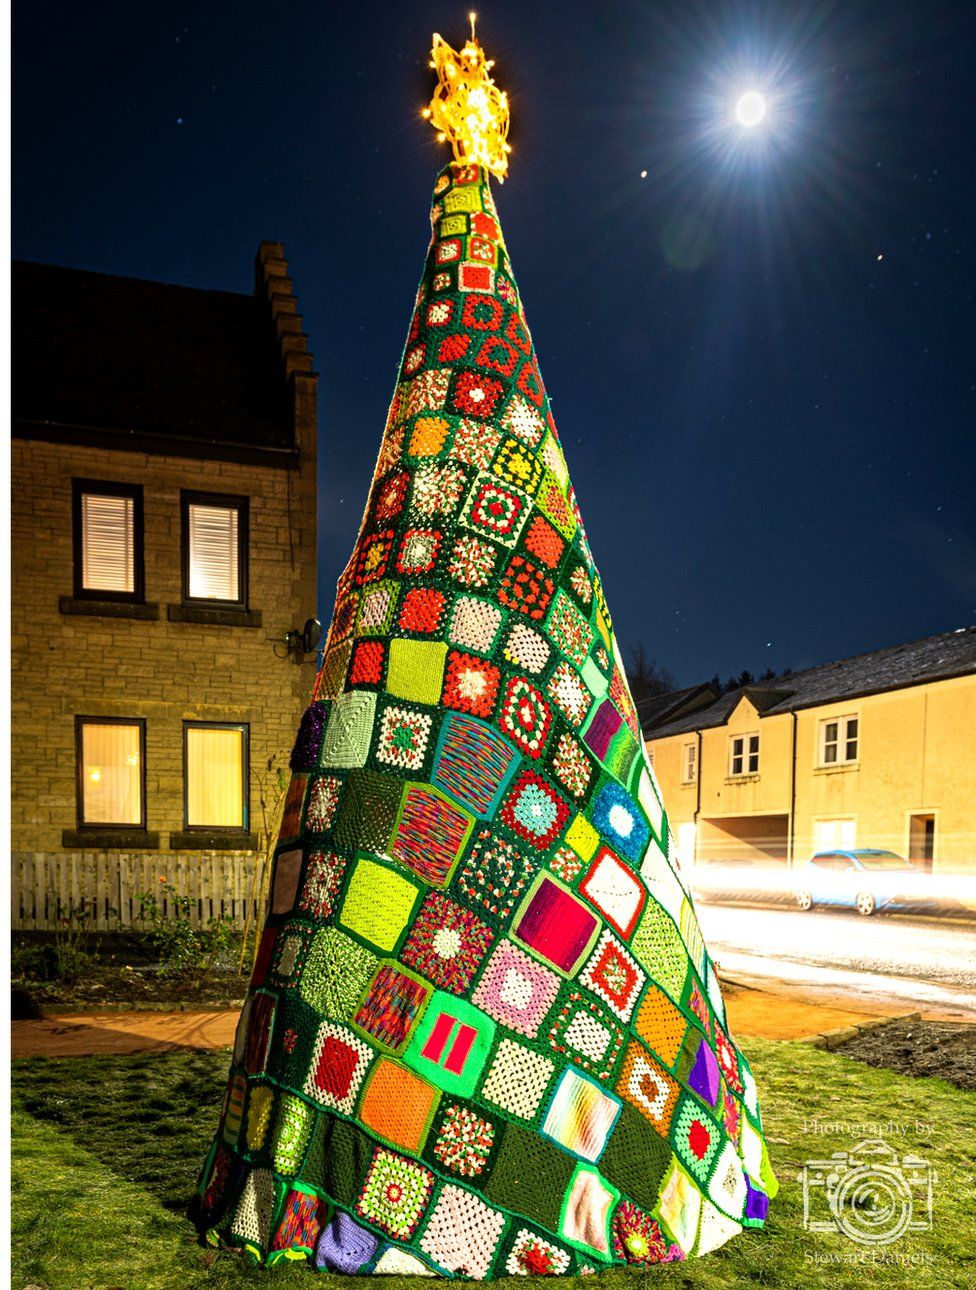 Strathaven knitted and crocheted Christmas tree